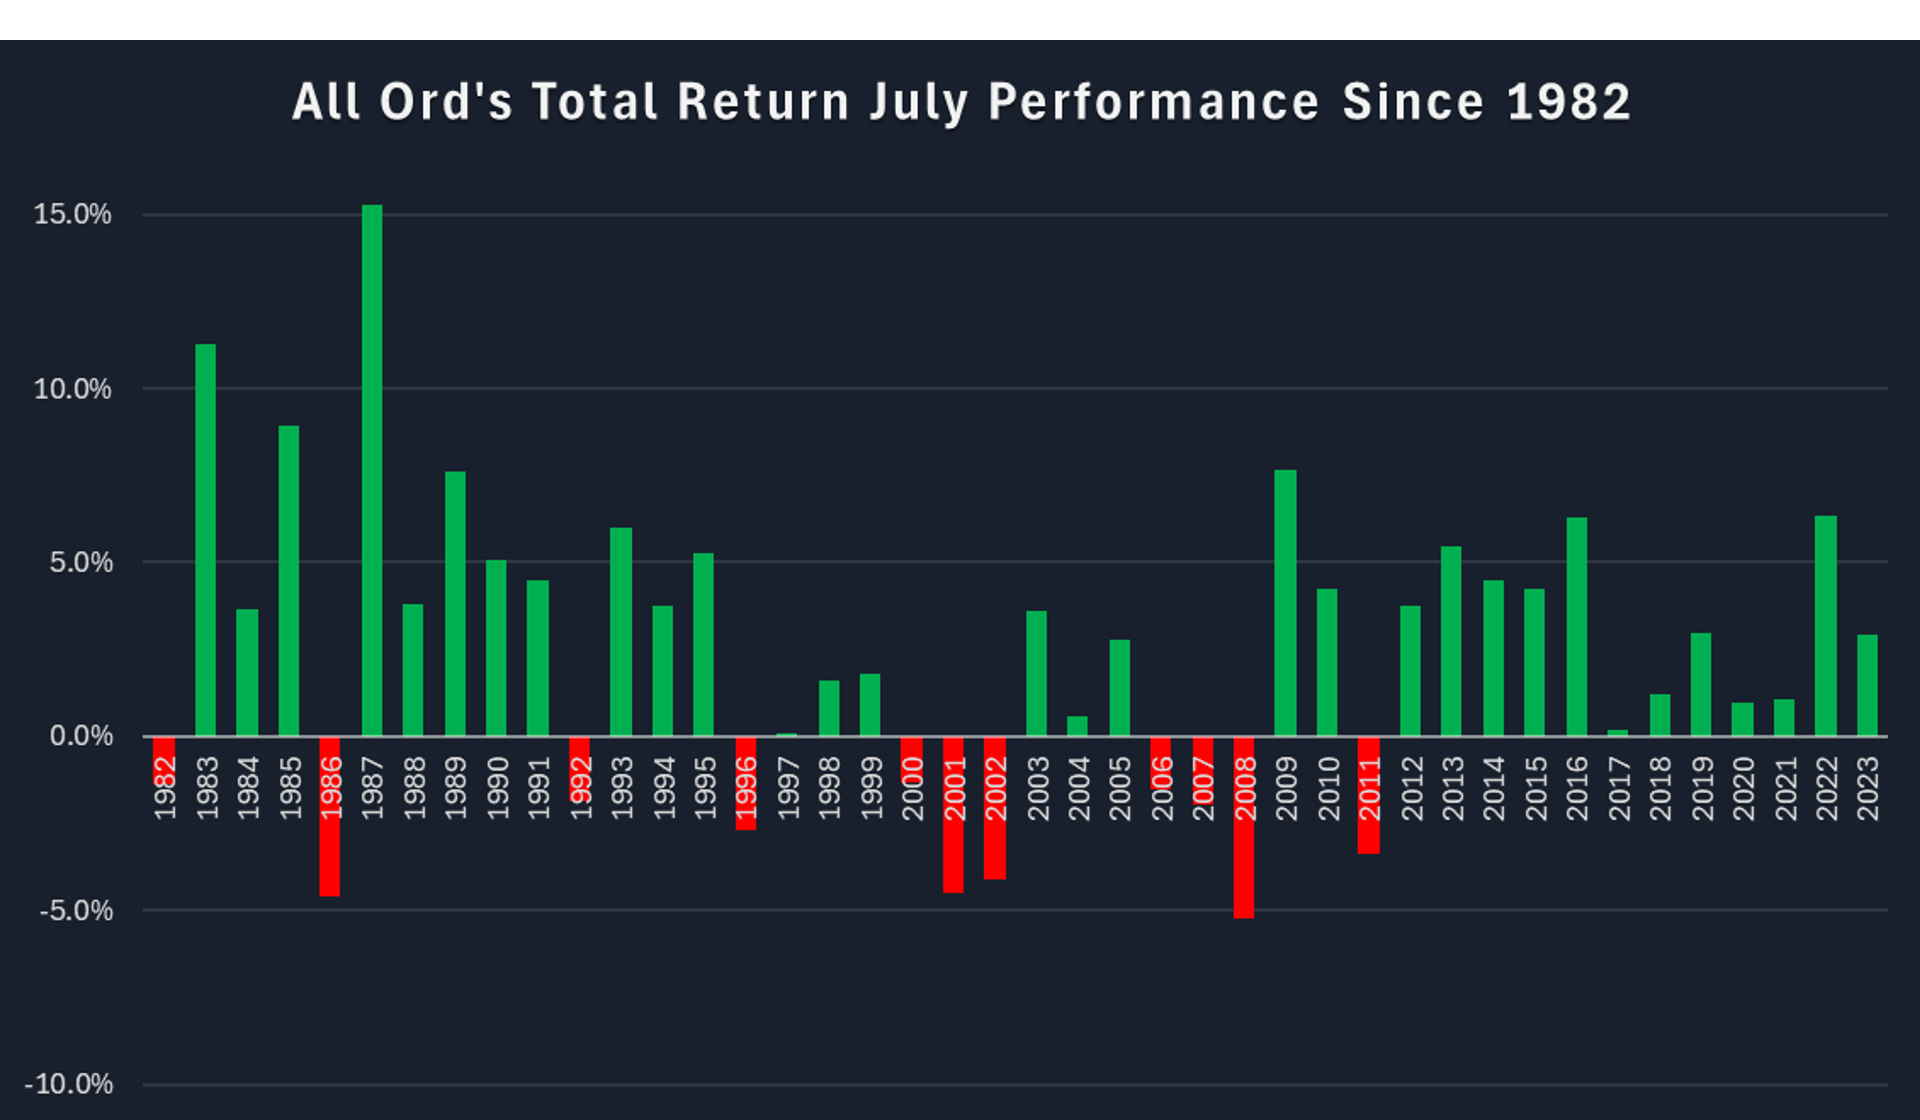 All Ords TR July Performance Since 1982